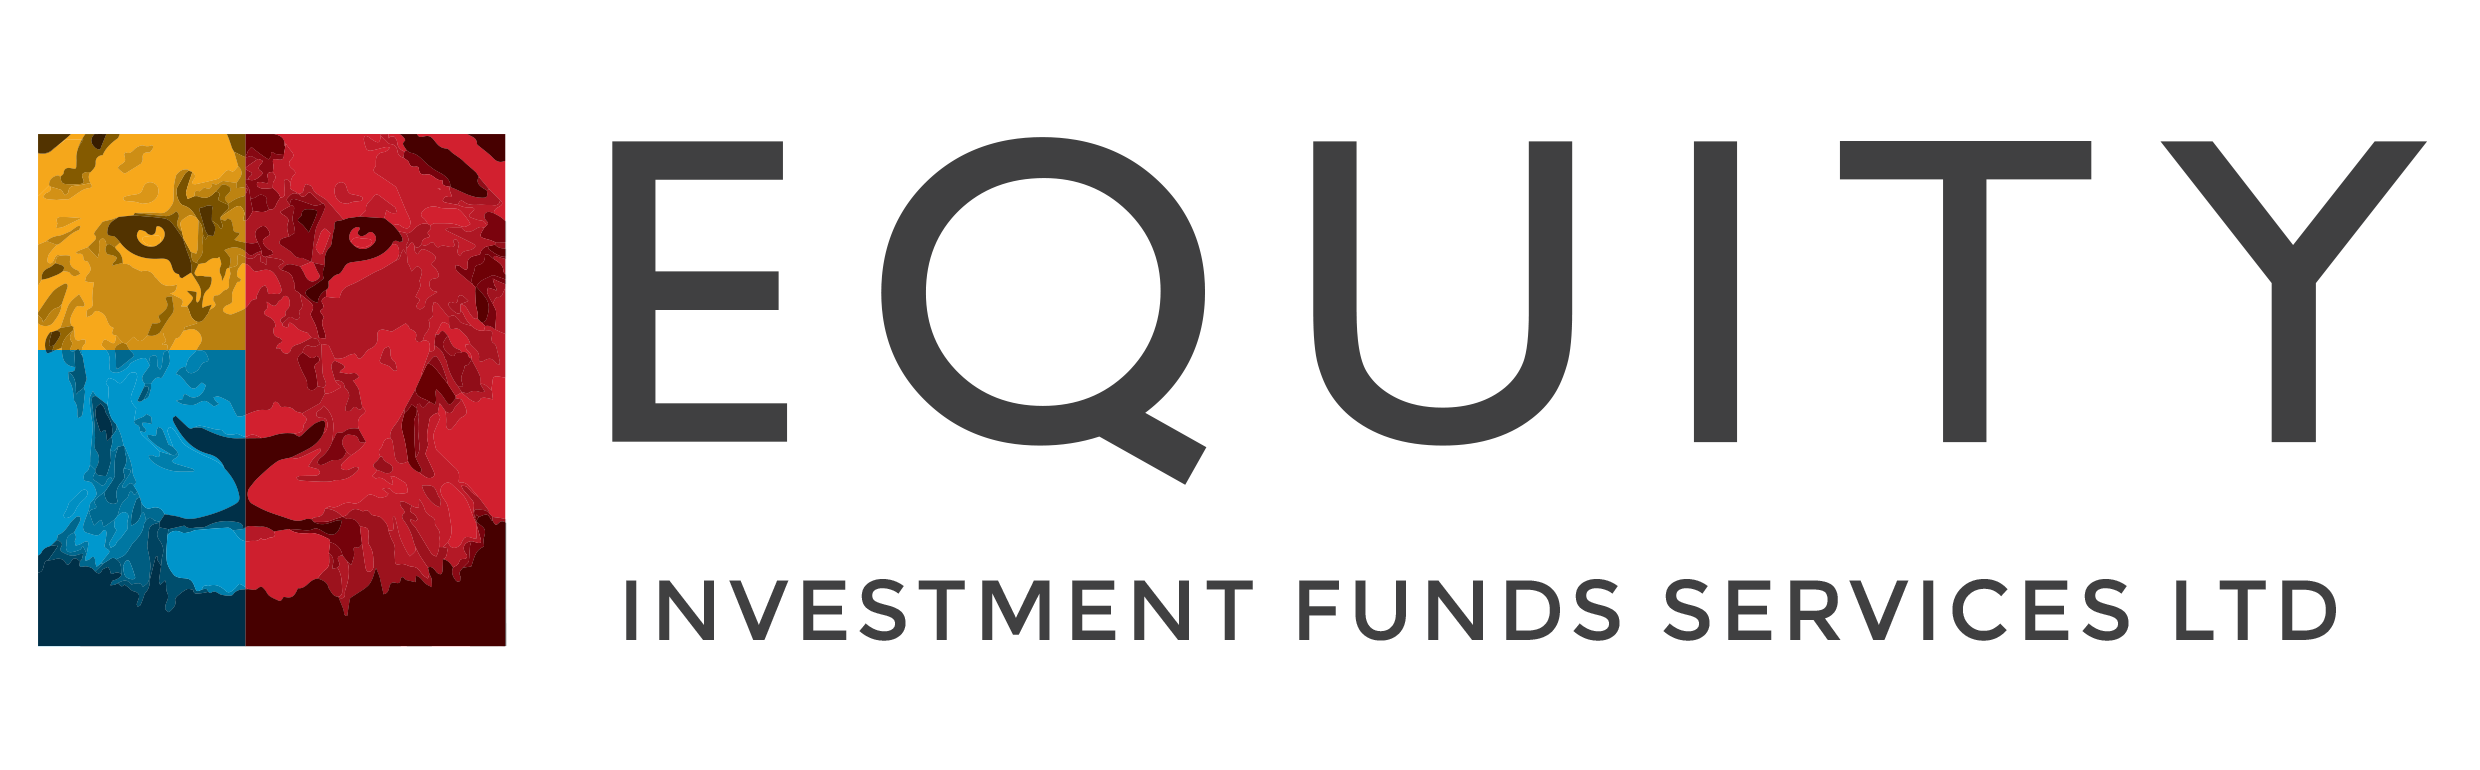 Equity Investment Funds